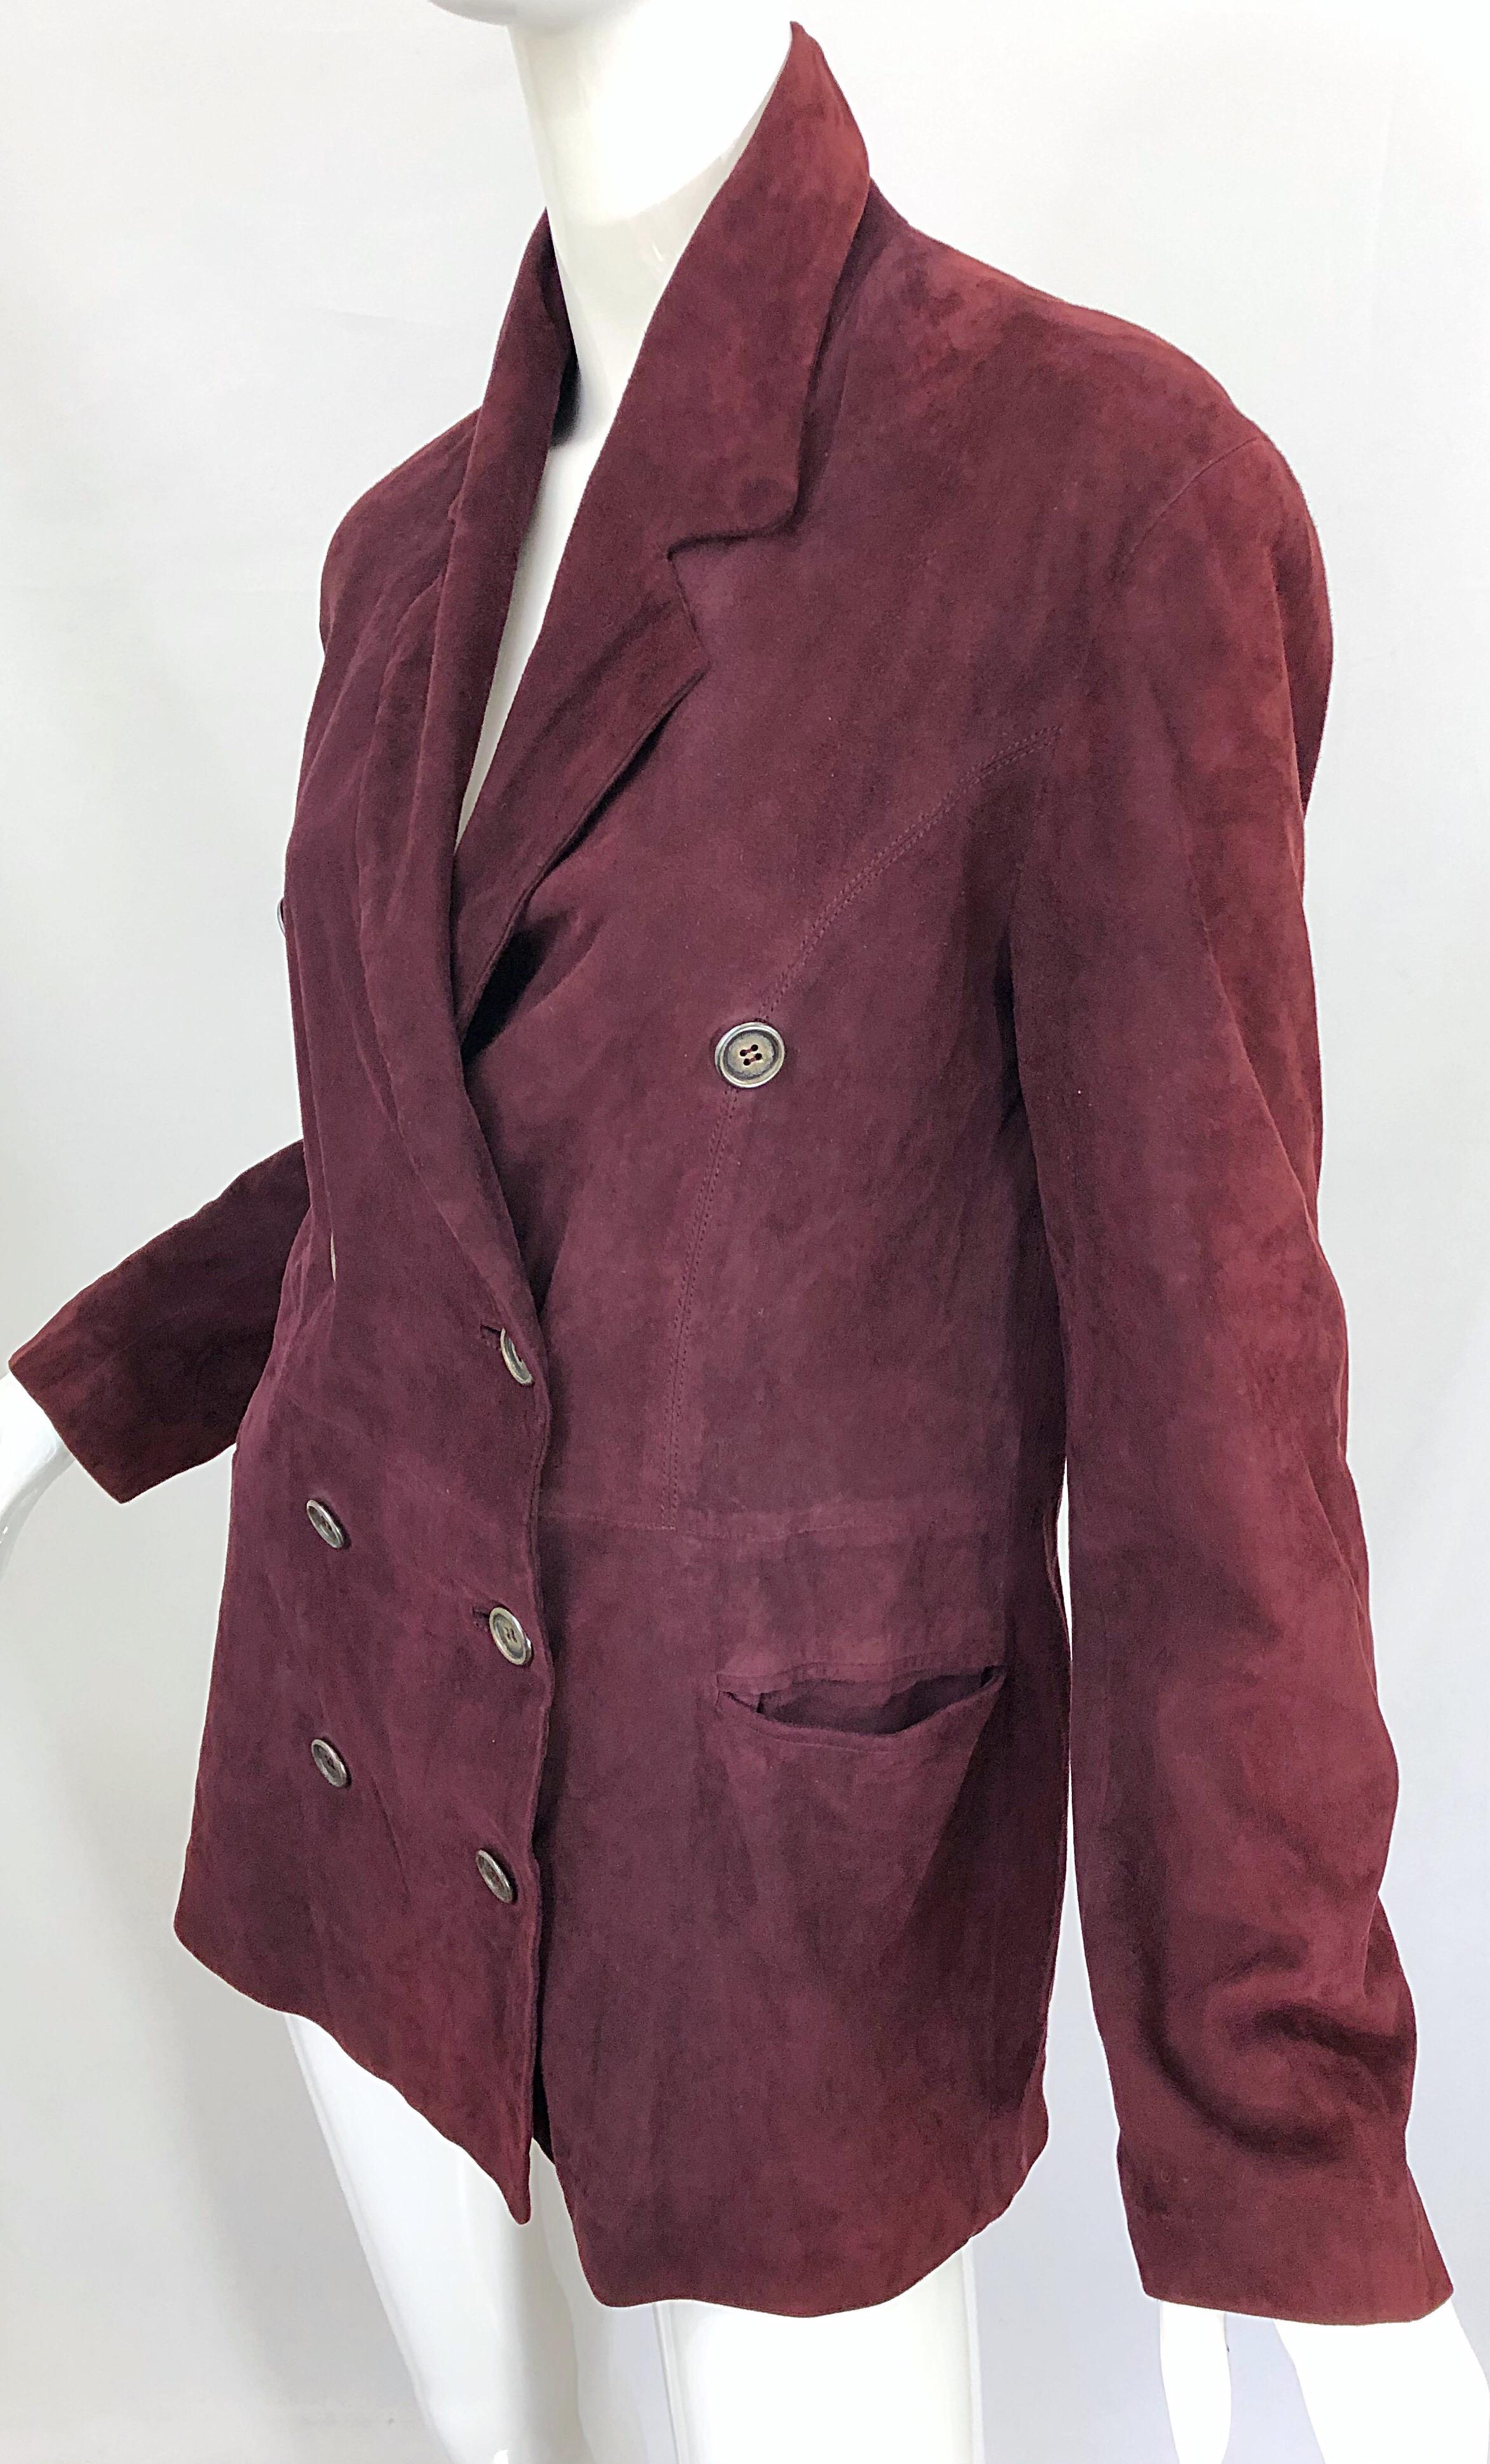 Ozbek 1990s Suede Leather Size 8 Burgundy Maroon Double Breasted Blazer ...